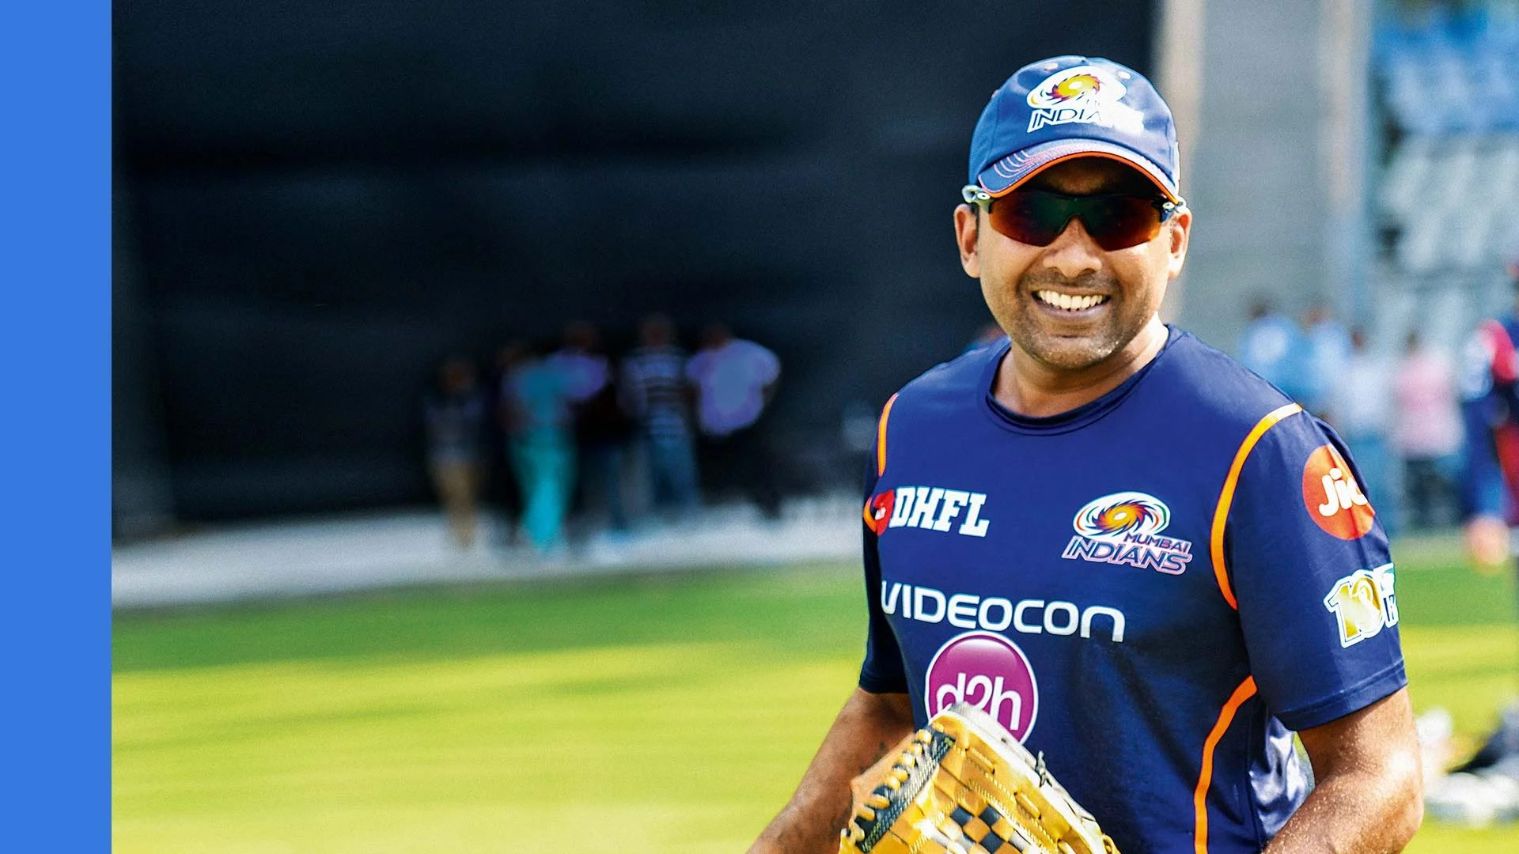 MI coach Mahela Jayawardene doesn't expect better pitch, commends highly-talented SRH side